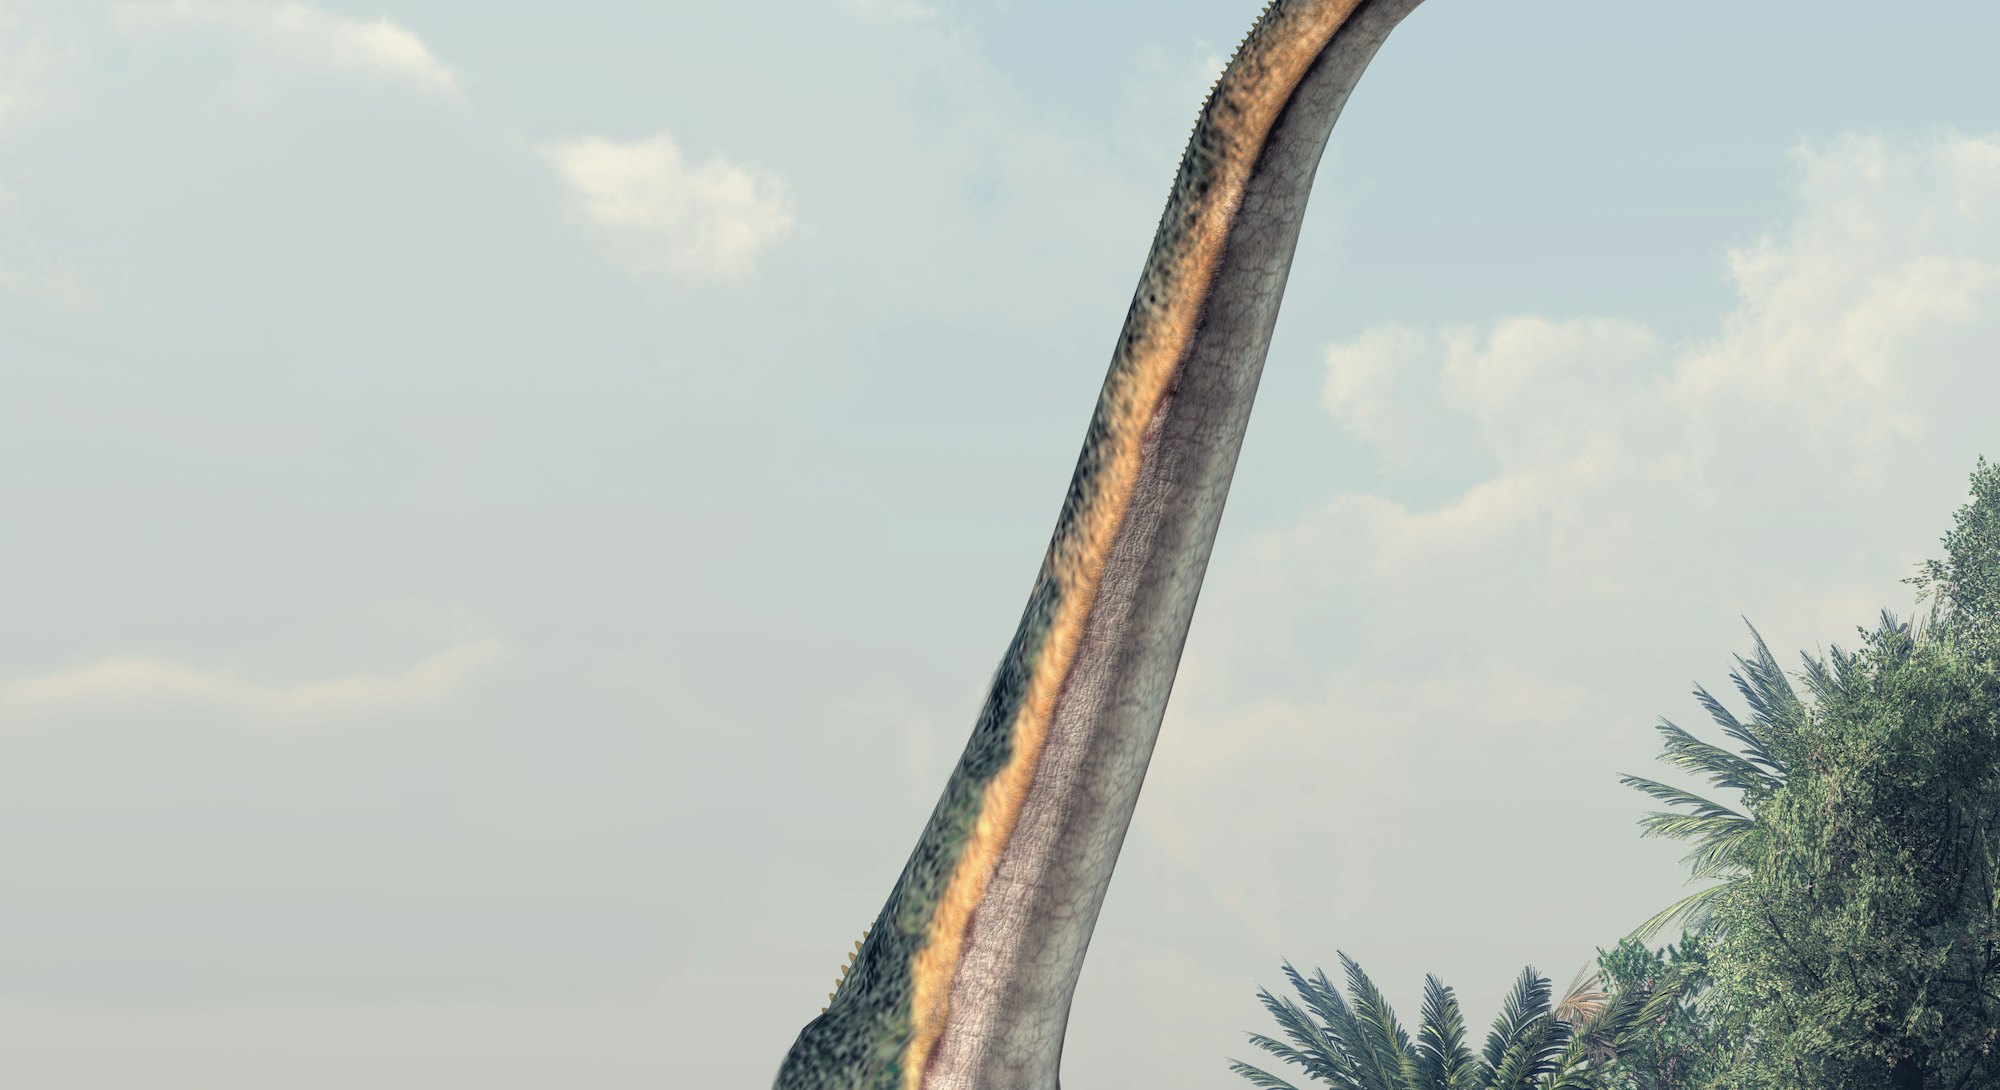 A giant sauropod, the largest of the dinosaurs and the biggest type of land animal ever, walks throu...